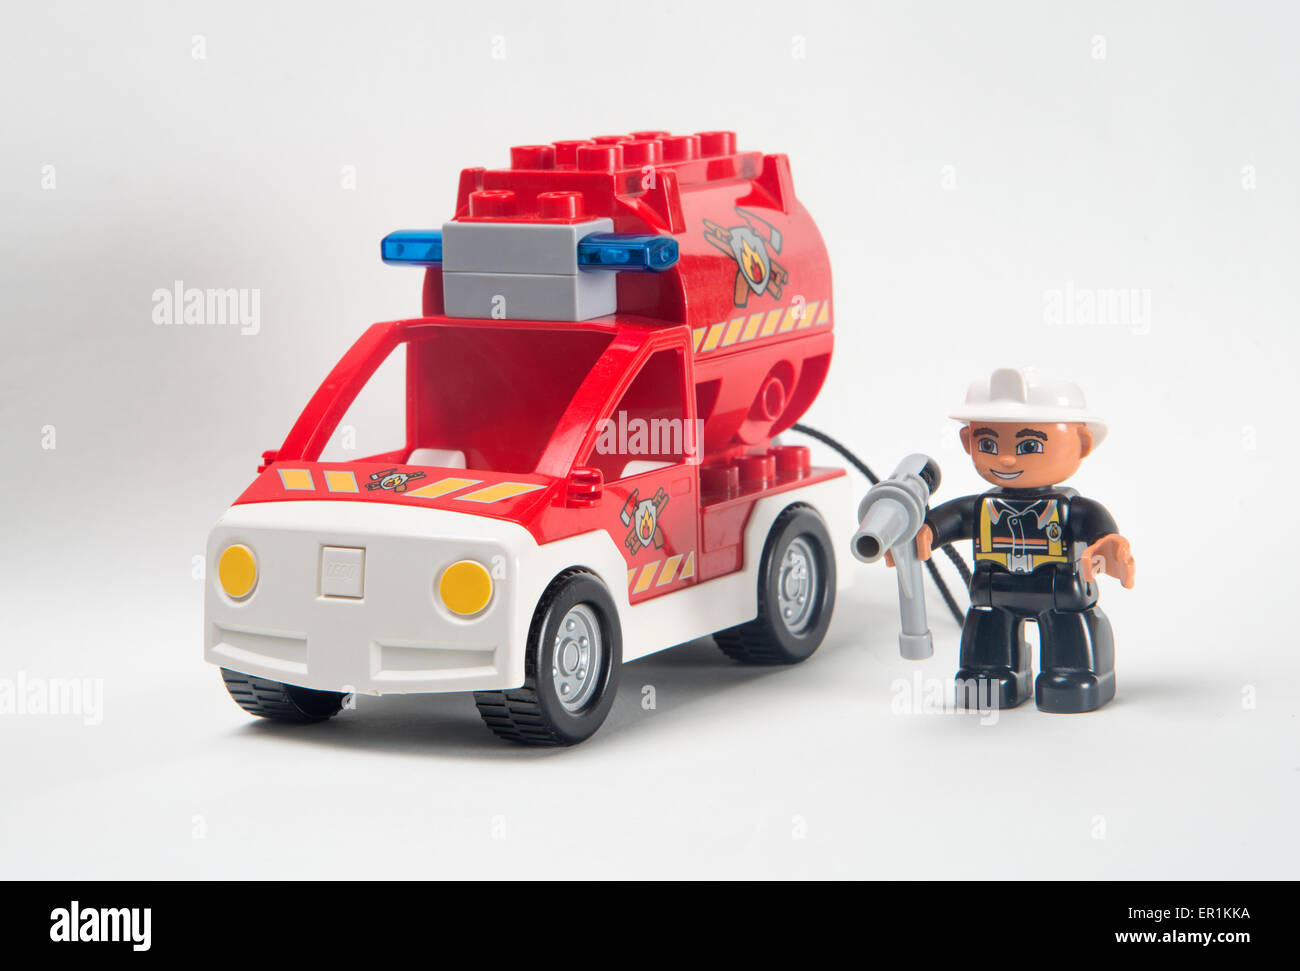 Lego Duplo High Resolution Stock Photography and Images - Alamy